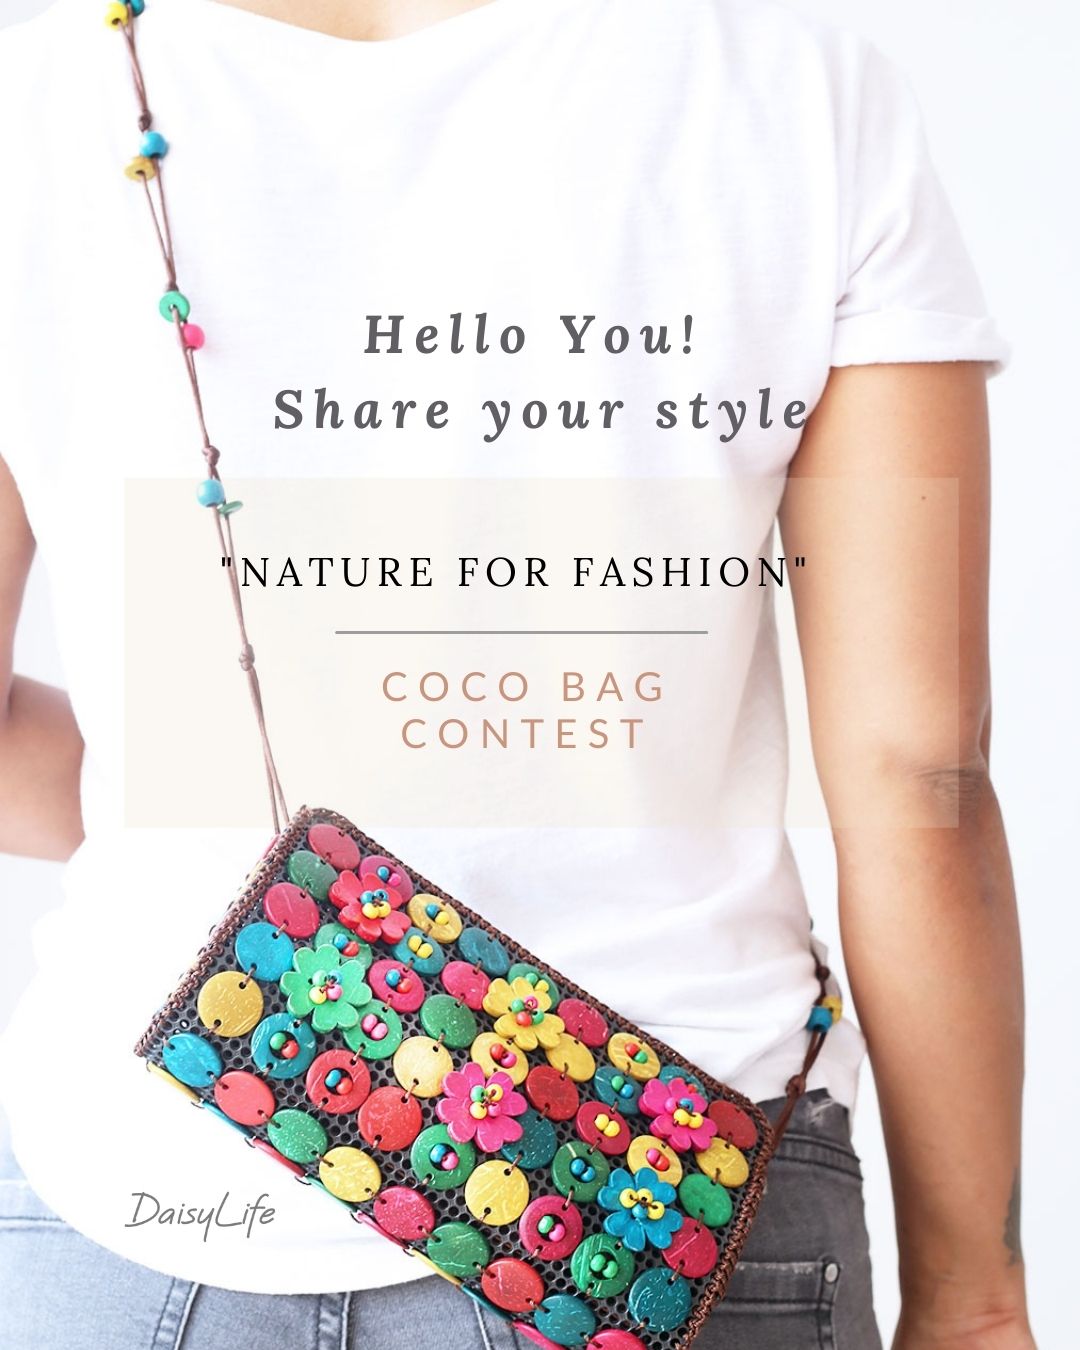 COCO BAGS - 5 Styles for Cool Natural Fashion